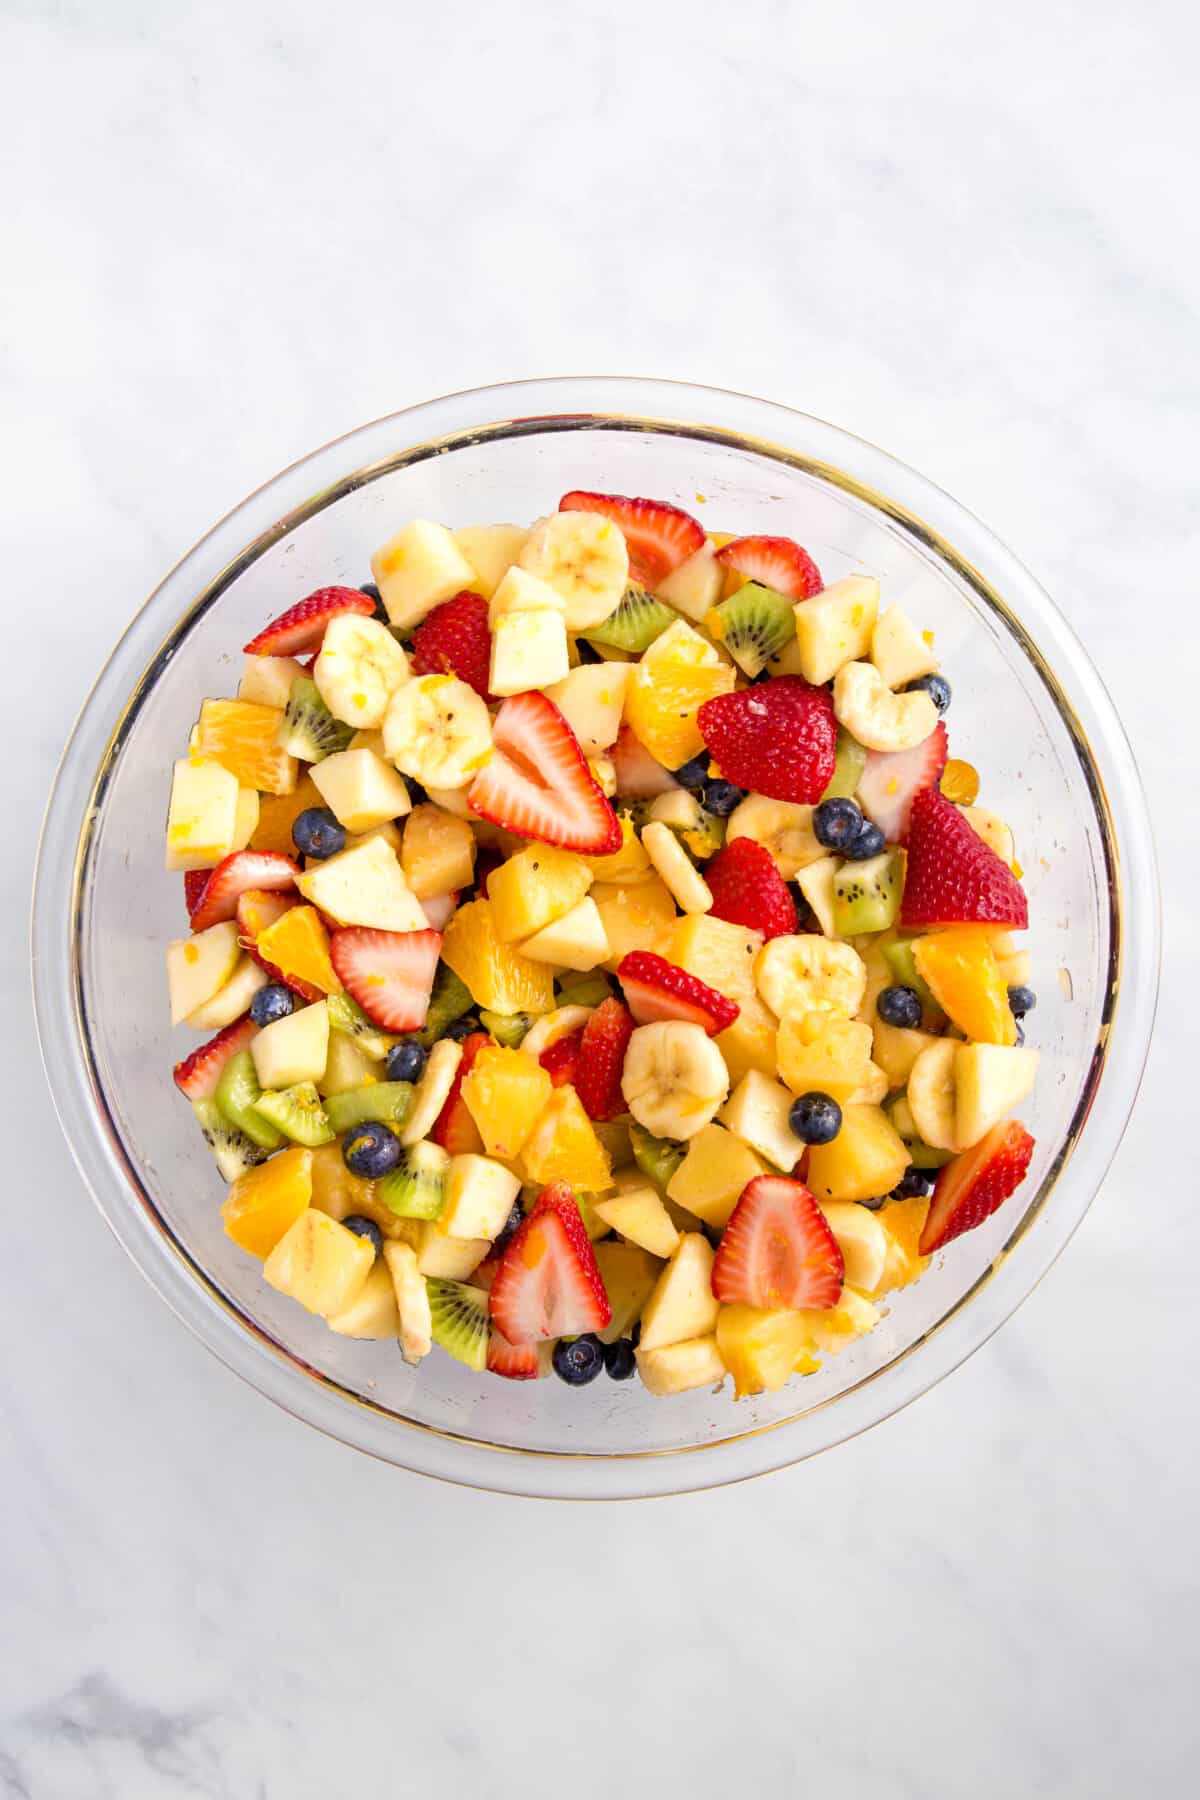 cut up strawberries, bananas, kiwi, oranges, pineapple, and fresh blueberries tossed in dressing served in a large glass bowl.